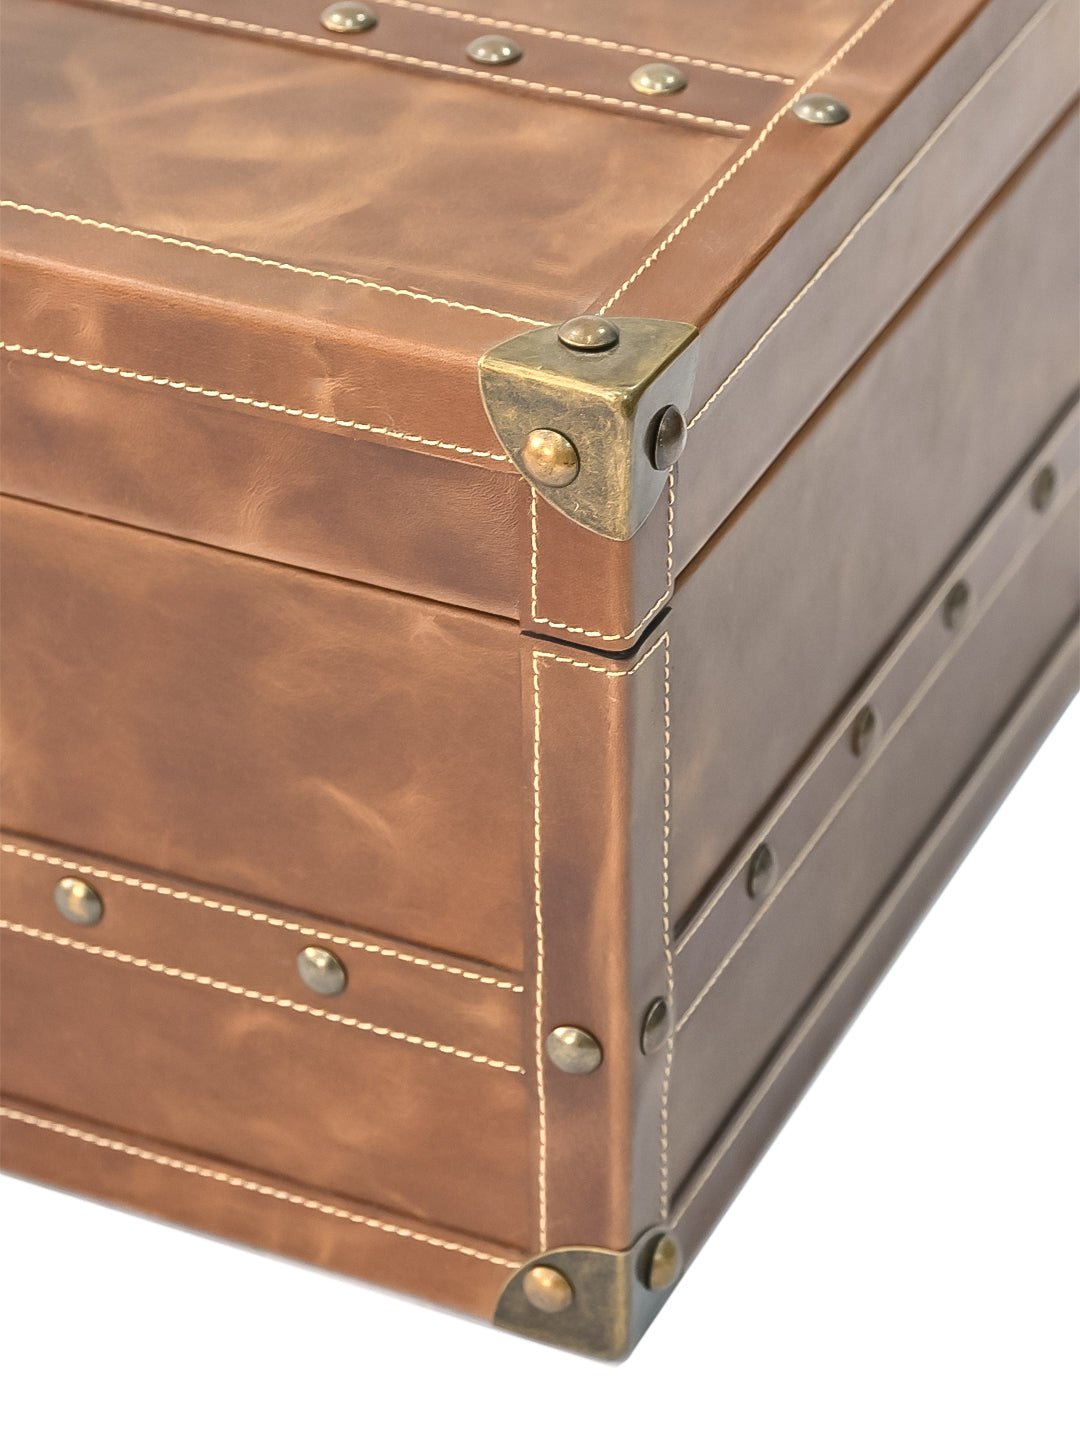 CORAL - LEATHER TRUNK - ART AVENUE